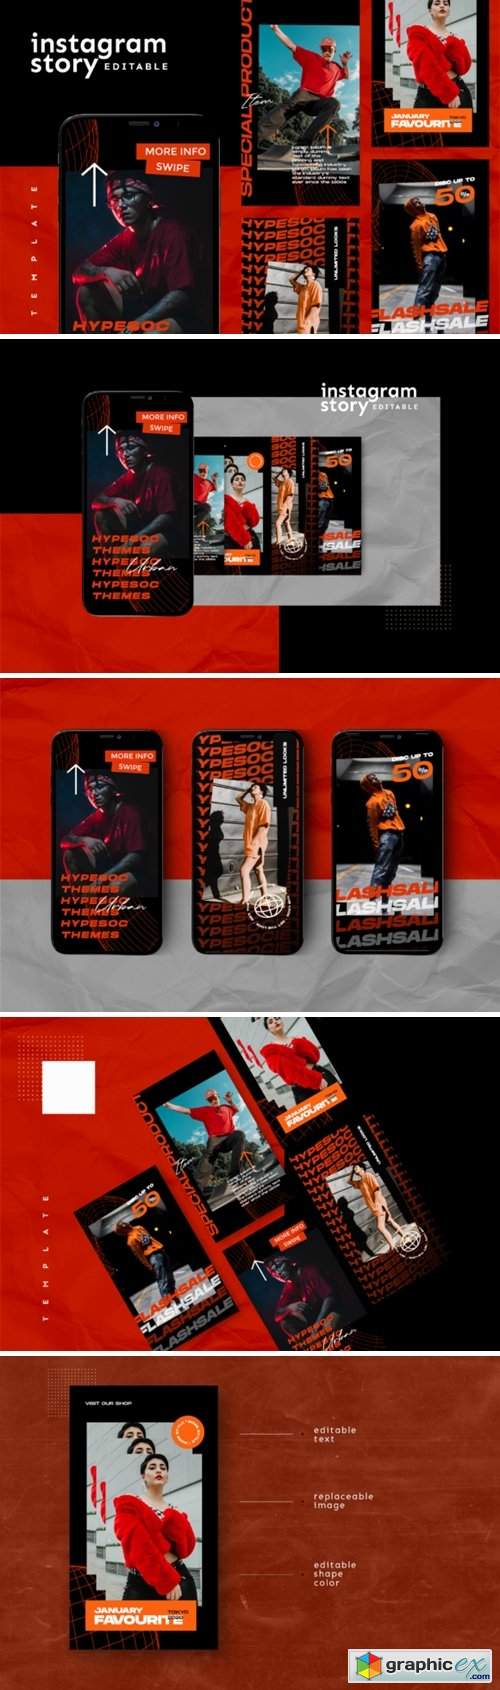  Instagram Story Template 3483601 